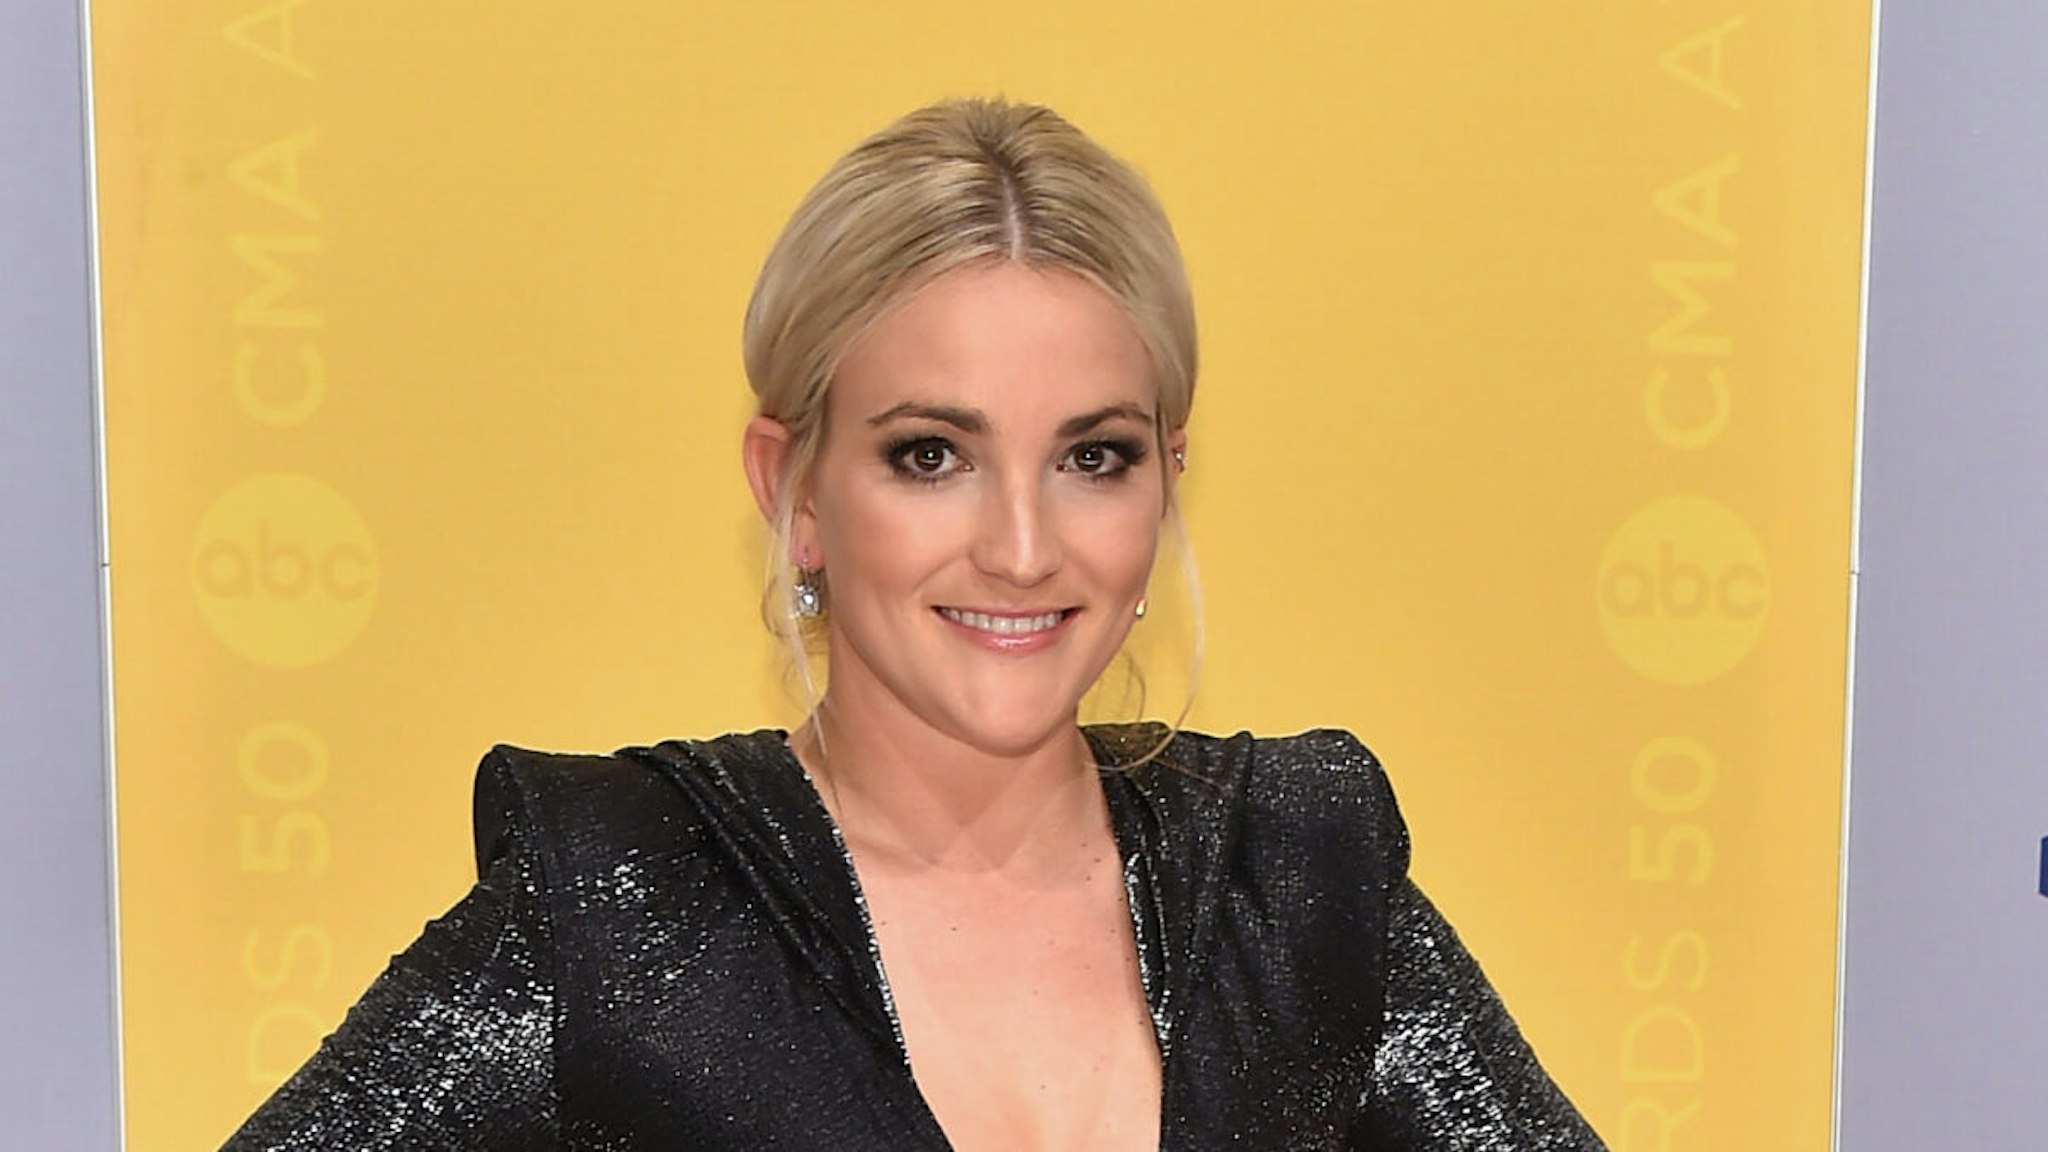 Singer-songwriter Jamie Lynn Spears attends the 50th annual CMA Awards at the Bridgestone Arena on November 2, 2016 in Nashville, Tennessee.